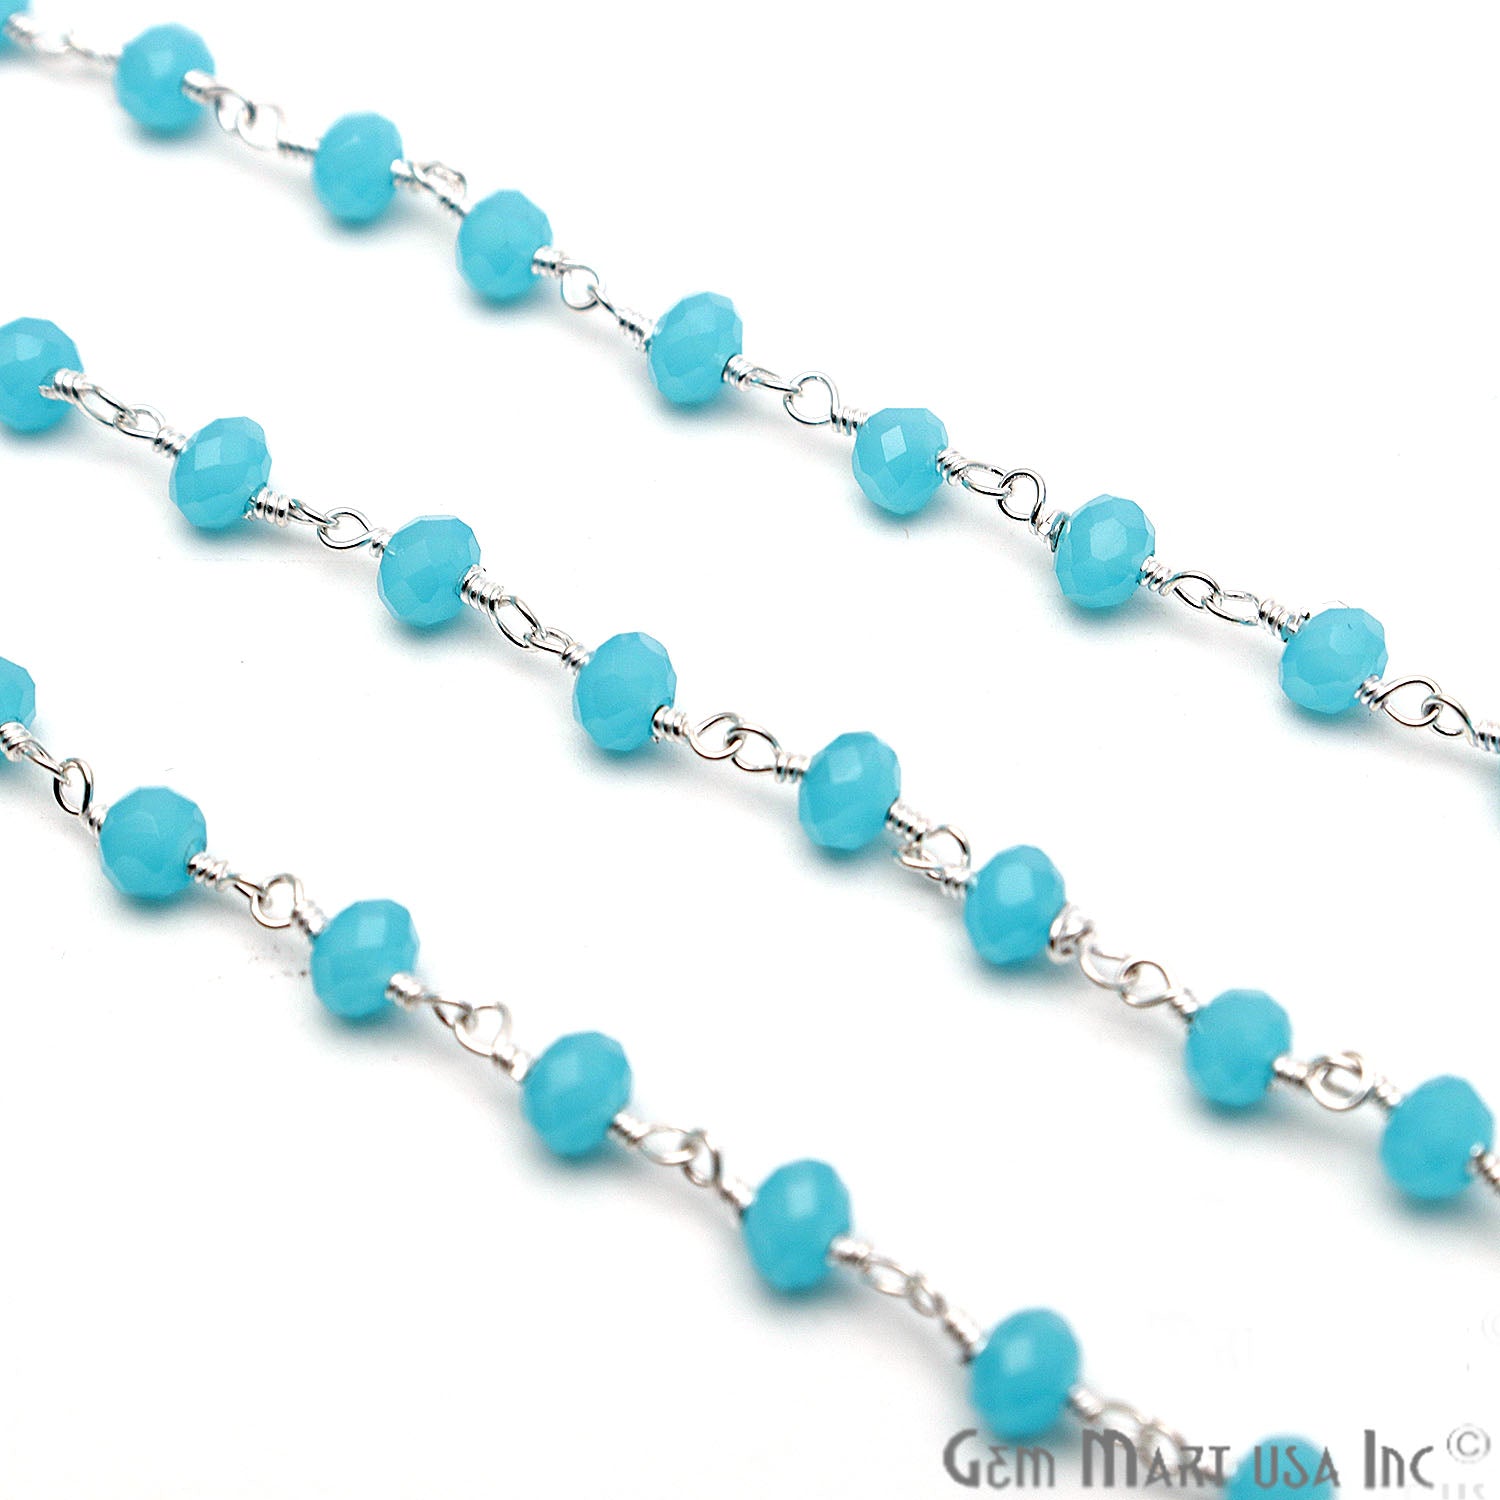 Aqua Chalcedony Faceted Beads Silver Plated Wire Wrapped Rosary Chain - GemMartUSA